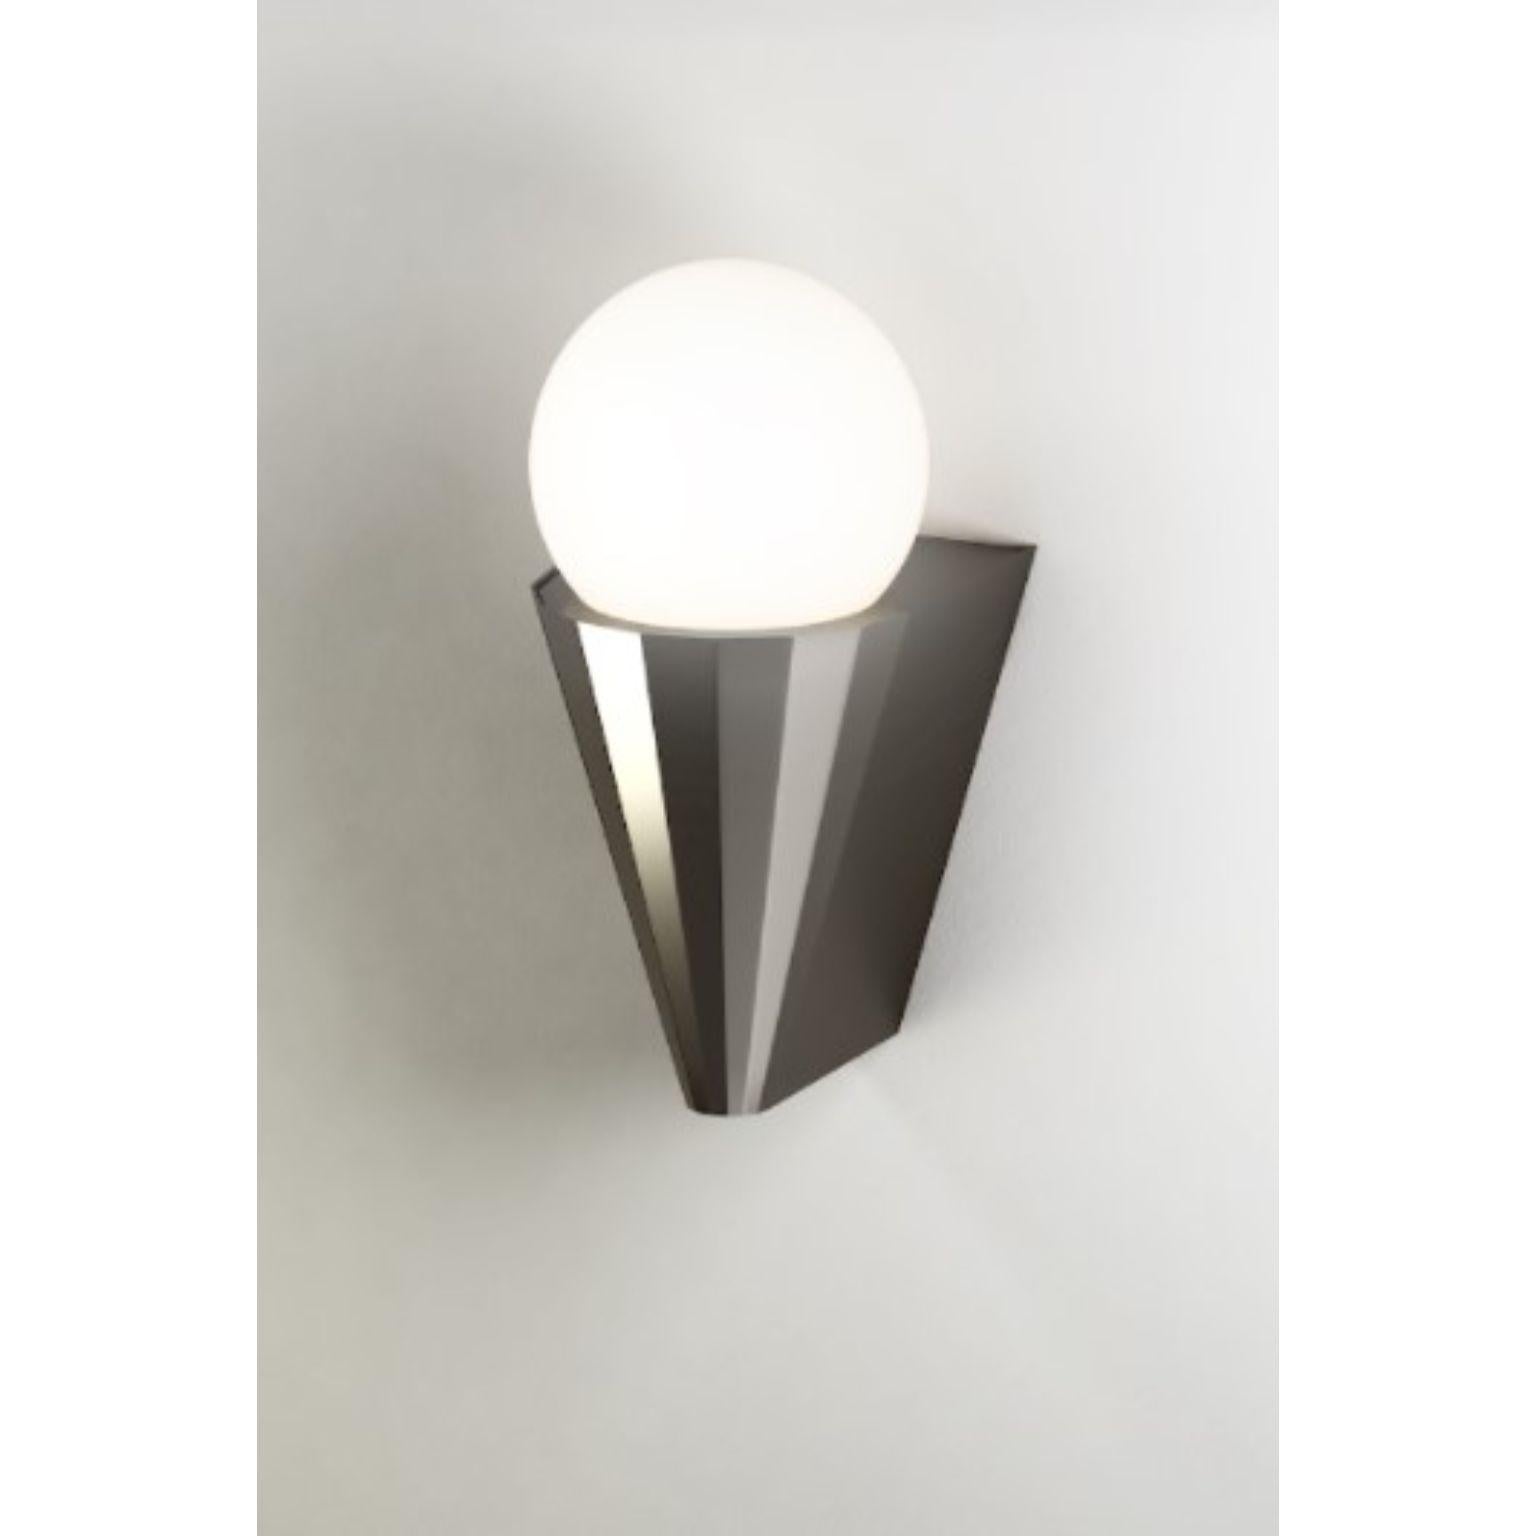 IP Cornet Polished graphite wall light by Emilie Cathelineau
Dimensions: D10 x W12.5 X H21.2 cm
Materials: solid brass, polished Graphite
Others finishes are available.

All our lamps can be wired according to each country. If sold to the USA